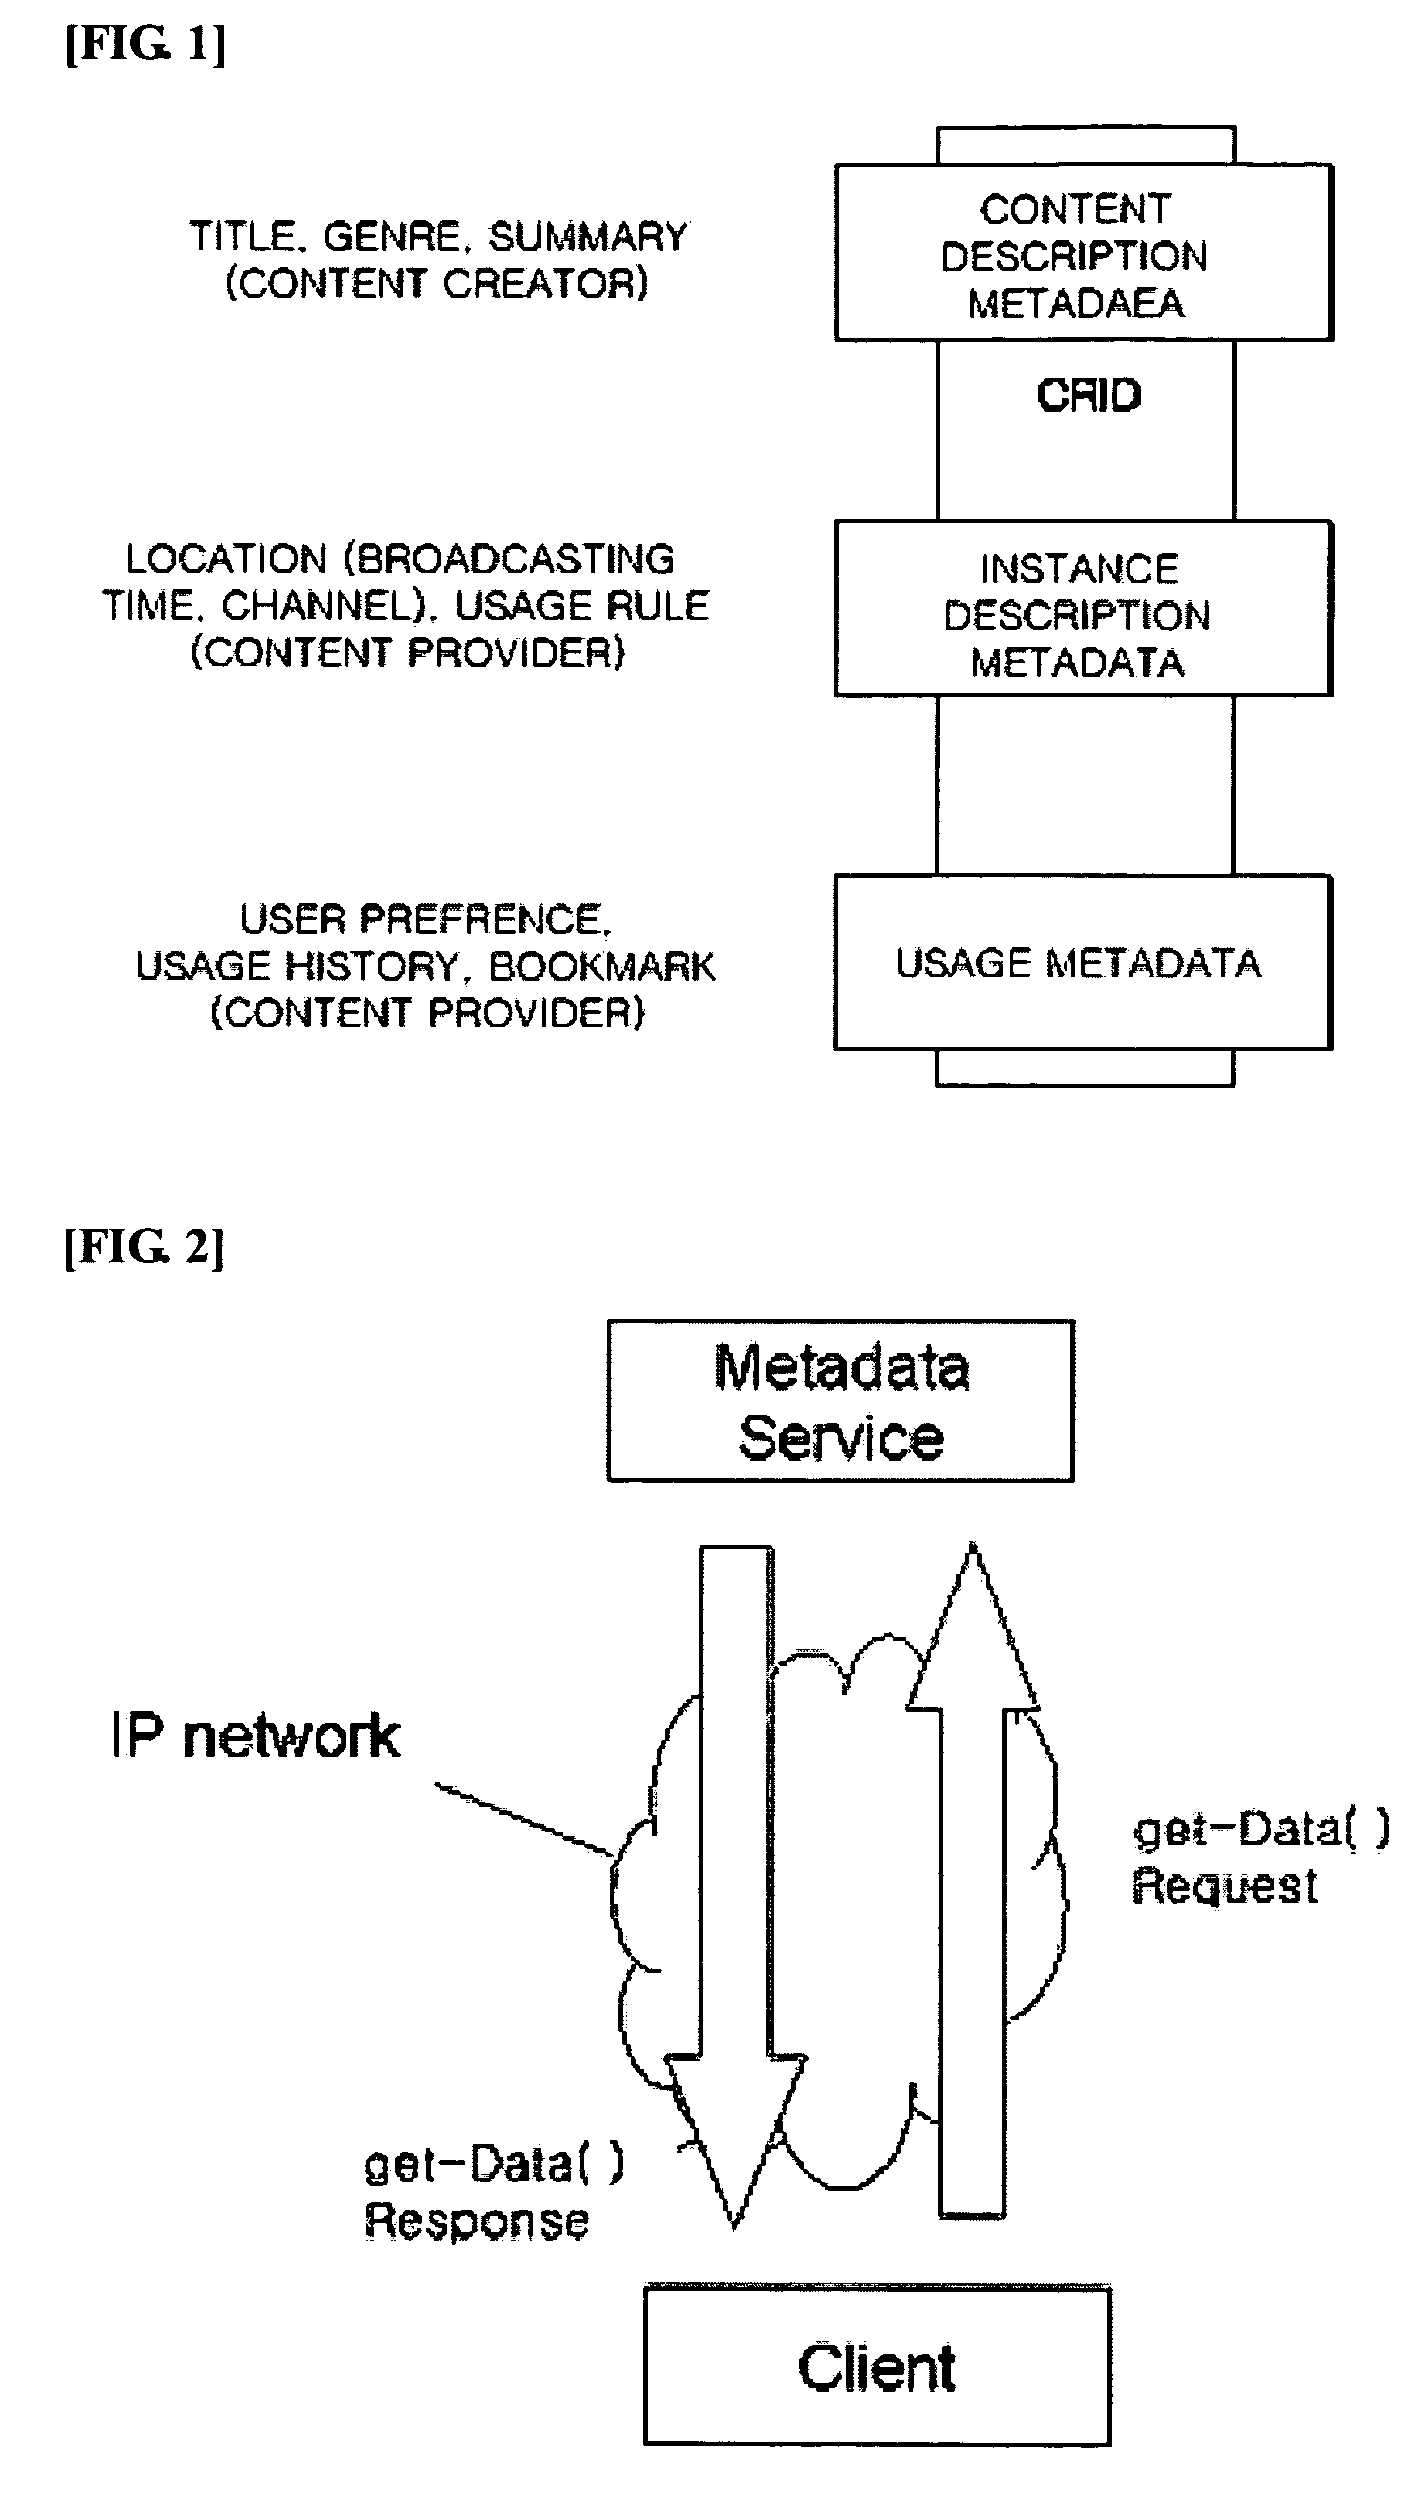 Method for deleting user metadata managed by a TV-Anytime metadata server using an SOAP operation